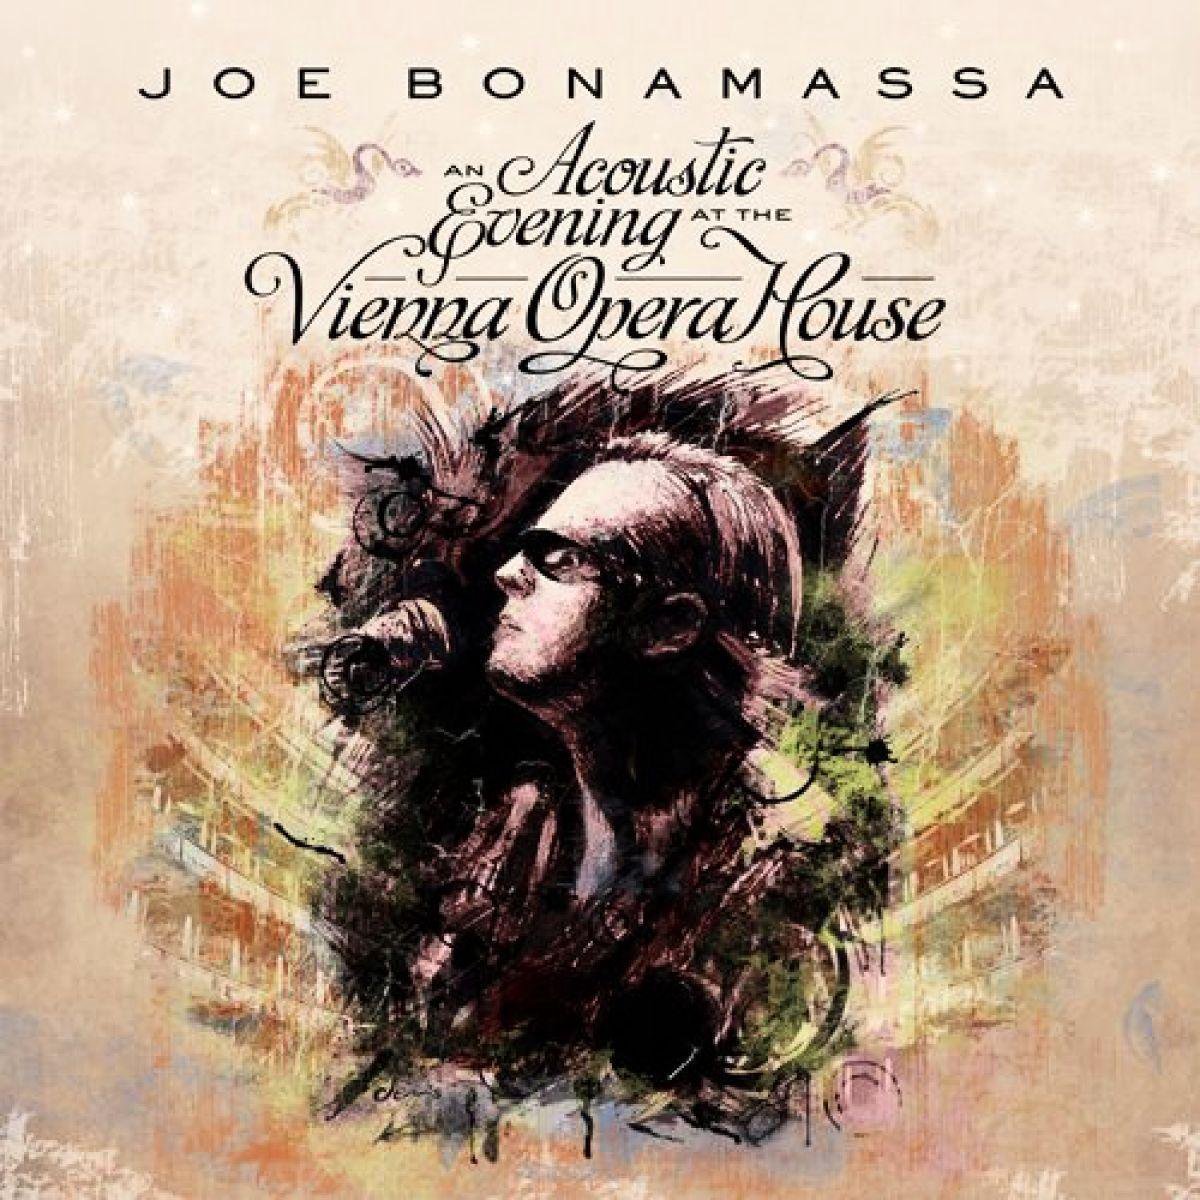 bol.com | An Acoustic Evening At The Vienna Opera House, Joe Bonamassa - An Acoustic Evening At The Vienna Opera House Joe Bonamassa